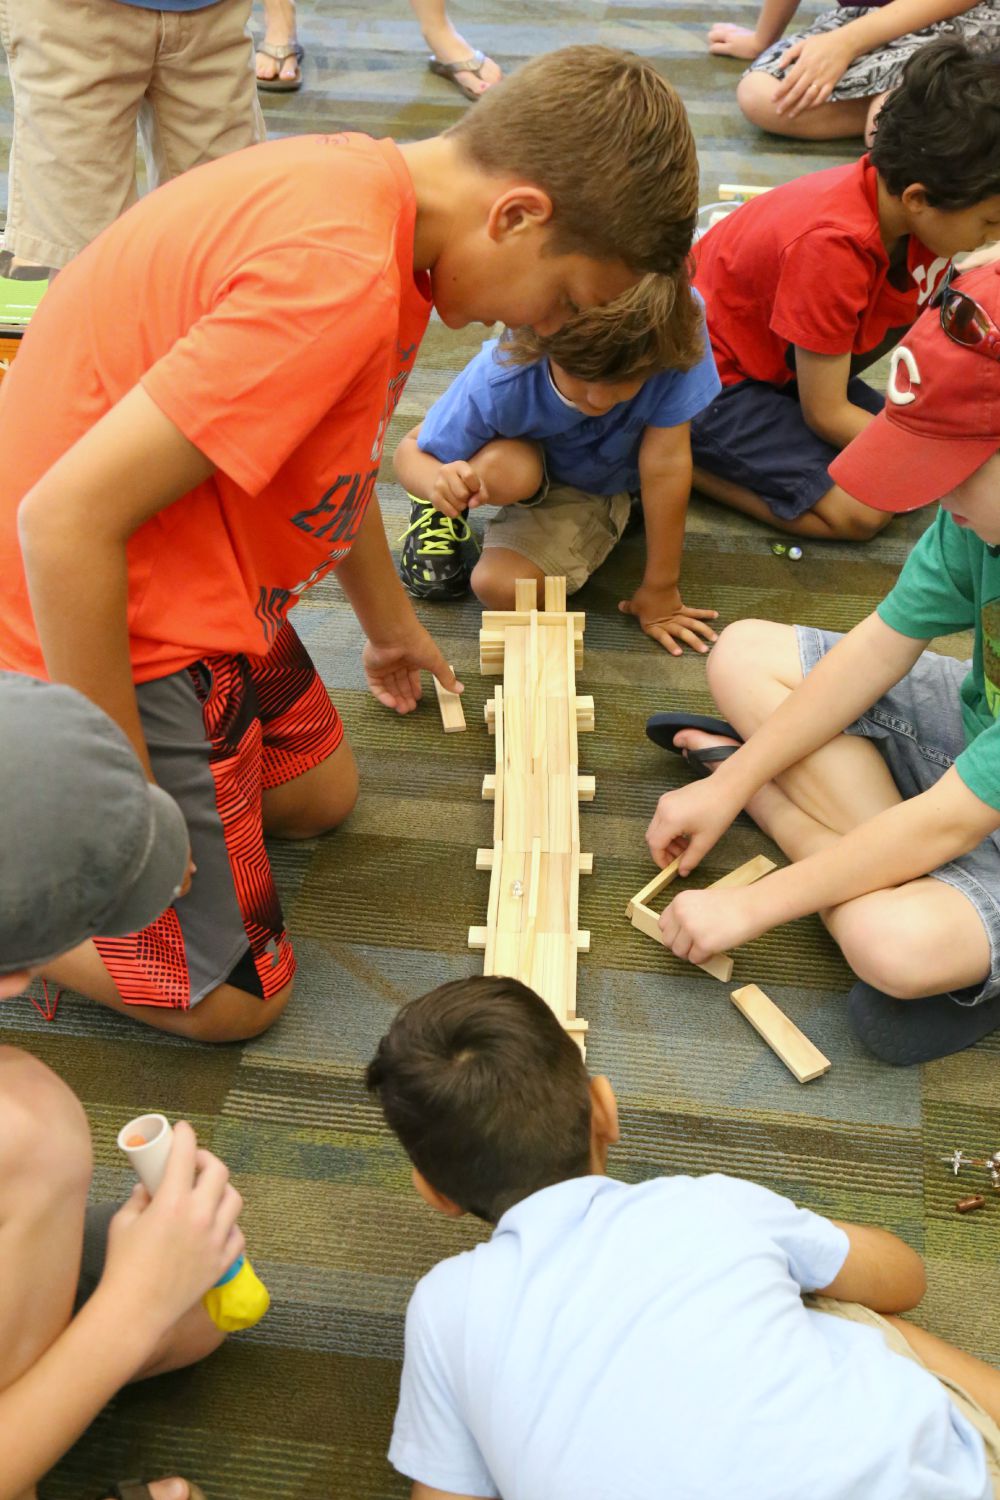 Five Engineering Challenges with KEVA Planks